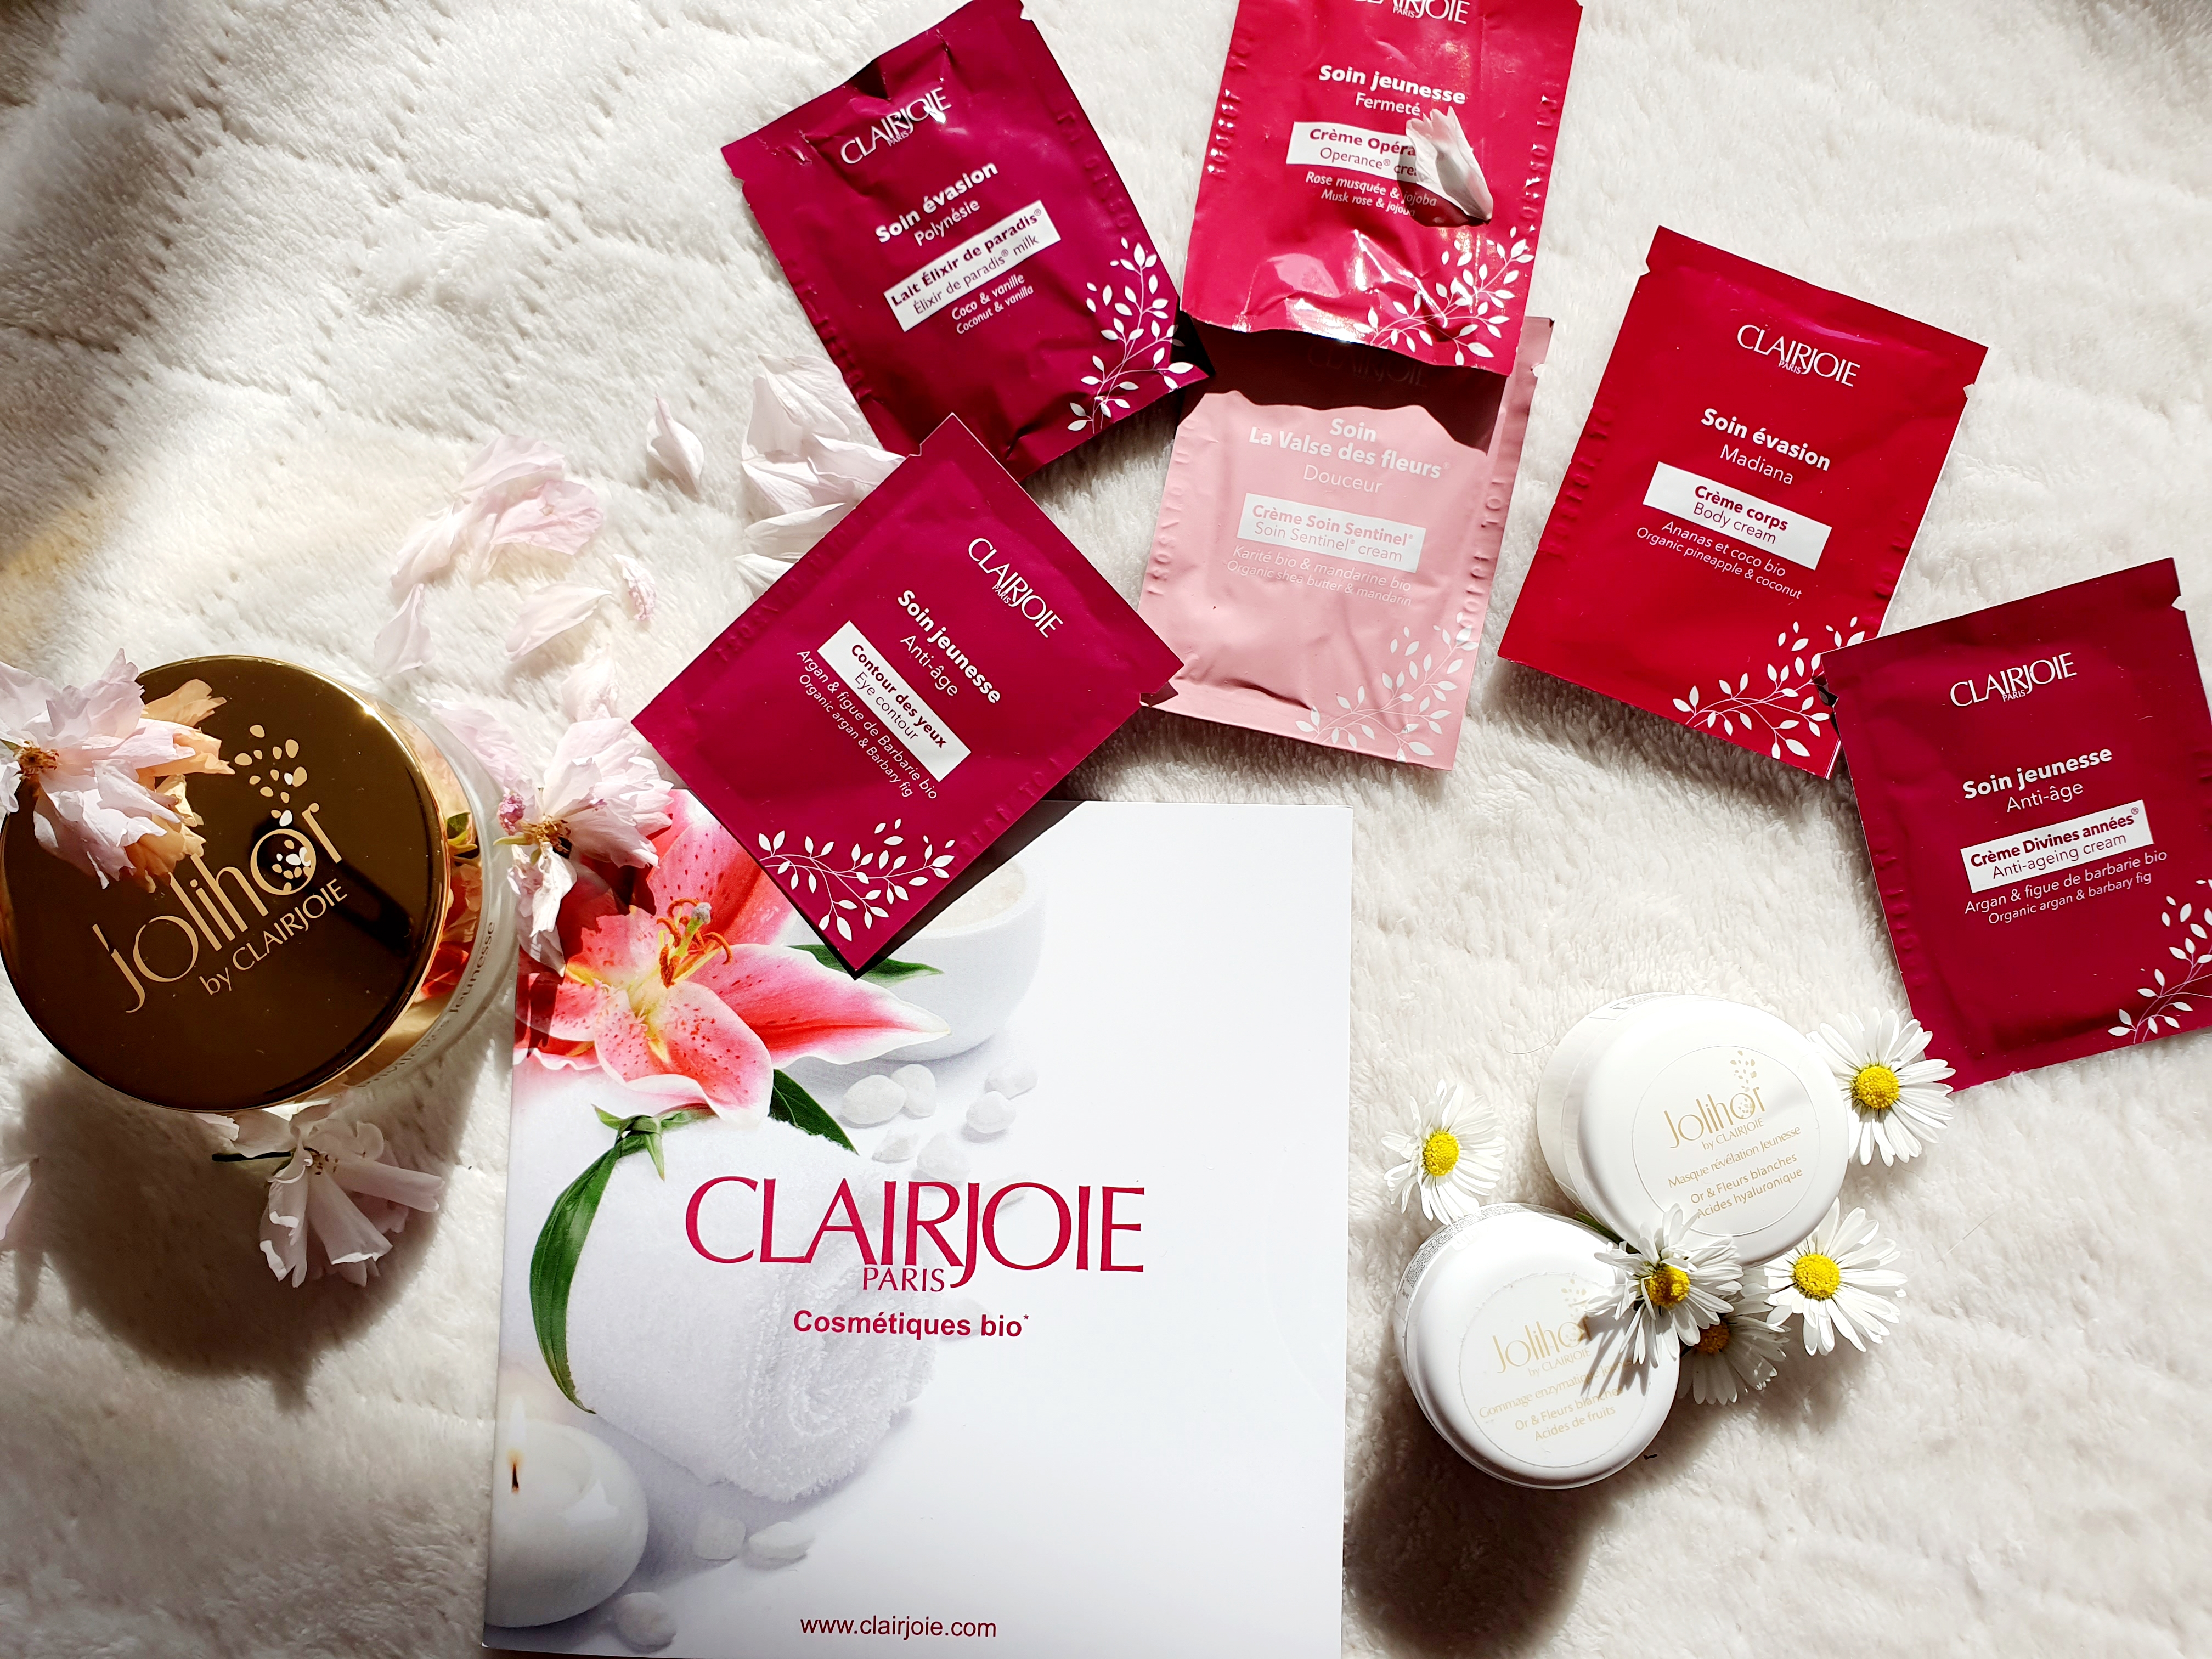 Clairjoie beauty products